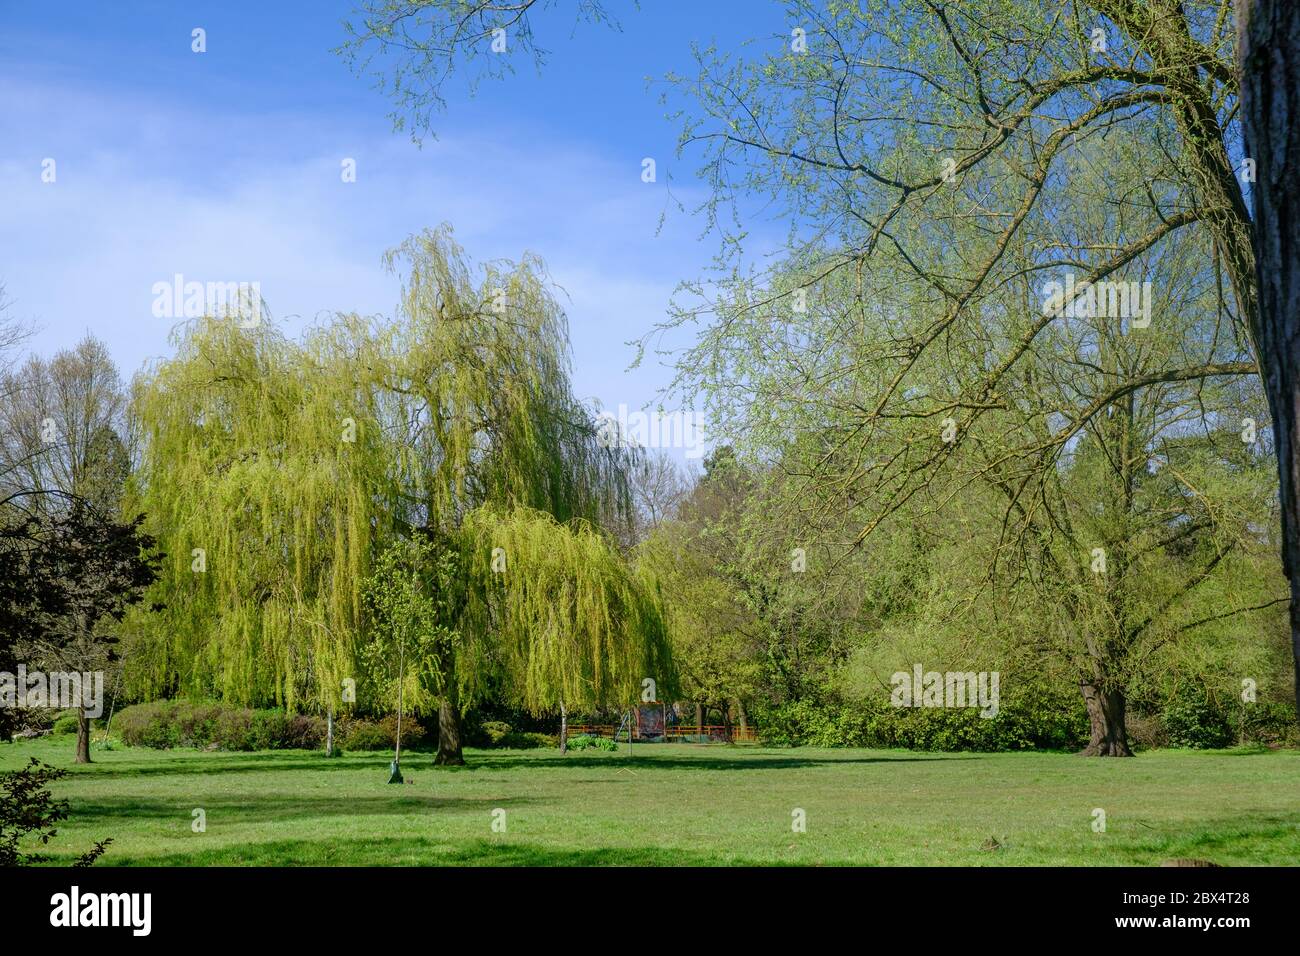 Tall trees and green grass under a blue sky in Spring at Pinner Memorial Park, Pinner, NW London, England UK. Stock Photo